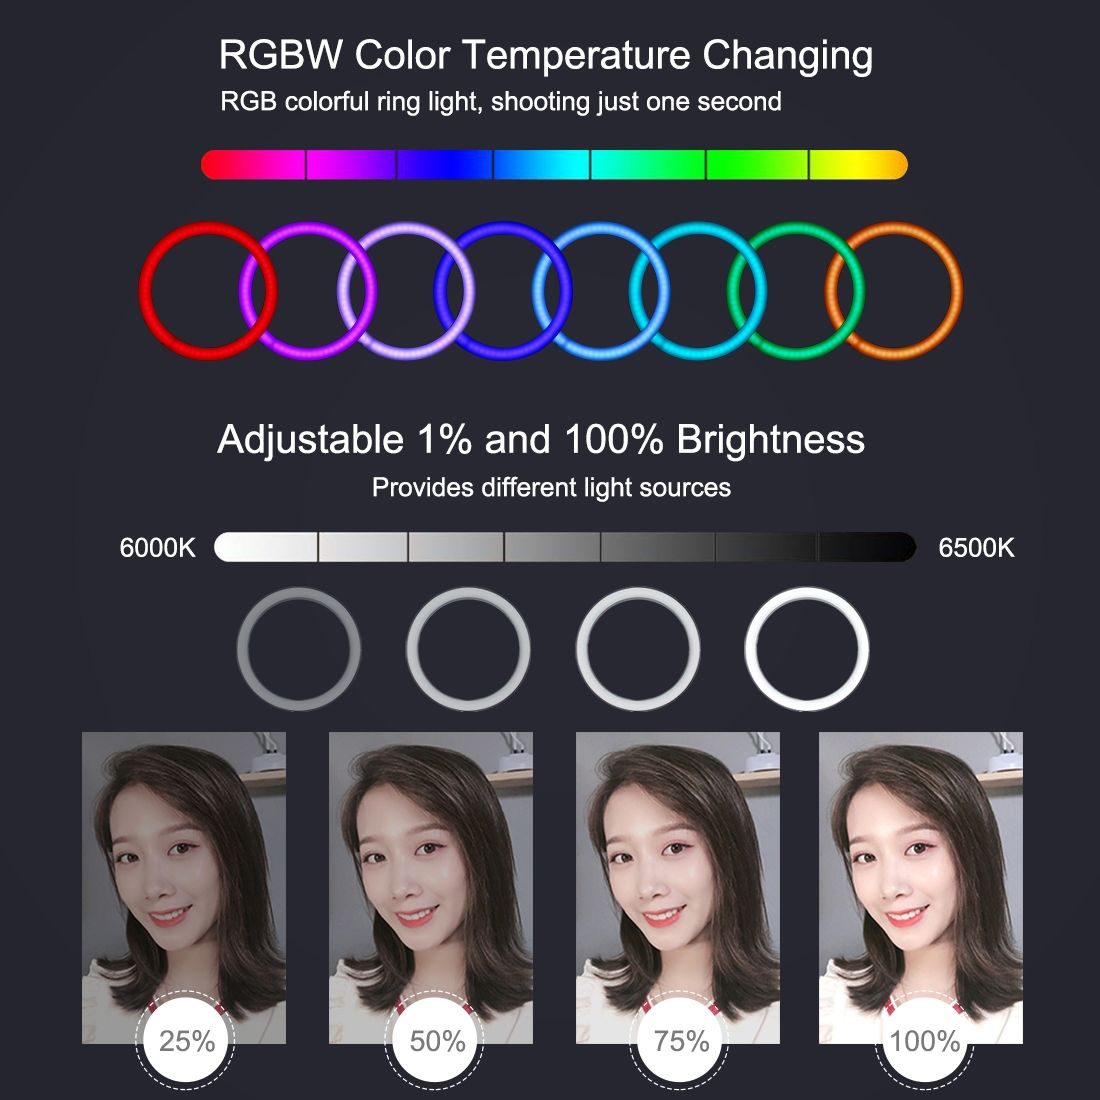 PULUZ-PKT3080B-79-Inch-bluetooth-APP-Remote-Control-Dimmable-RGBW-LED-Curved-Ring-Light-with-Desktop-1694777